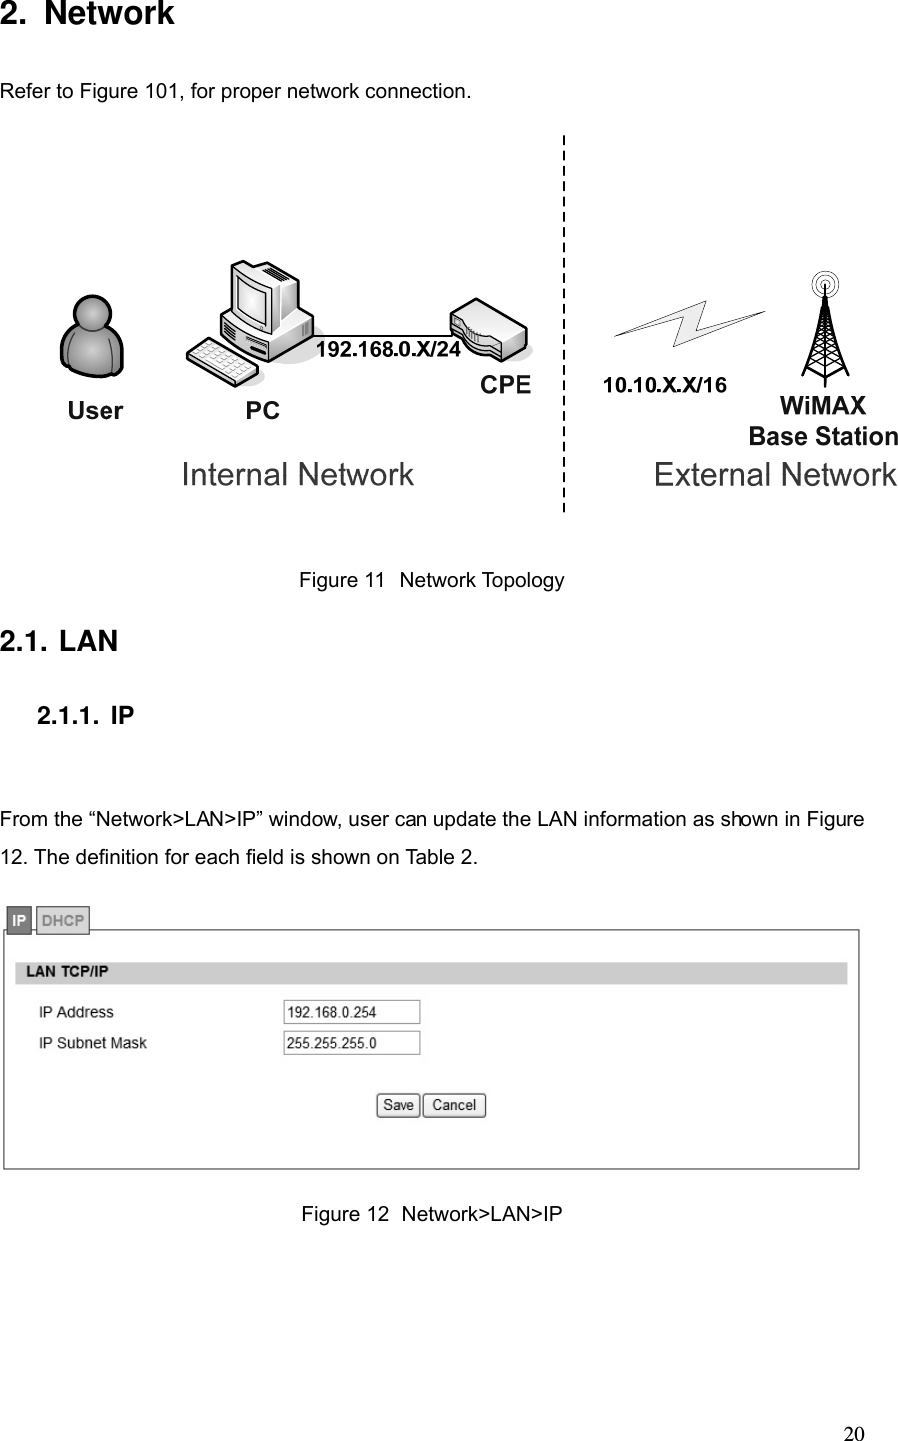  202. Network Refer to Figure 101, for proper network connection.  Figure 11  Network Topology 2.1. LAN 2.1.1. IP From the “Network&gt;LAN&gt;IP” window, user can update the LAN information as shown in Figure 12. The definition for each field is shown on Table 2.    Figure 12  Network&gt;LAN&gt;IP 